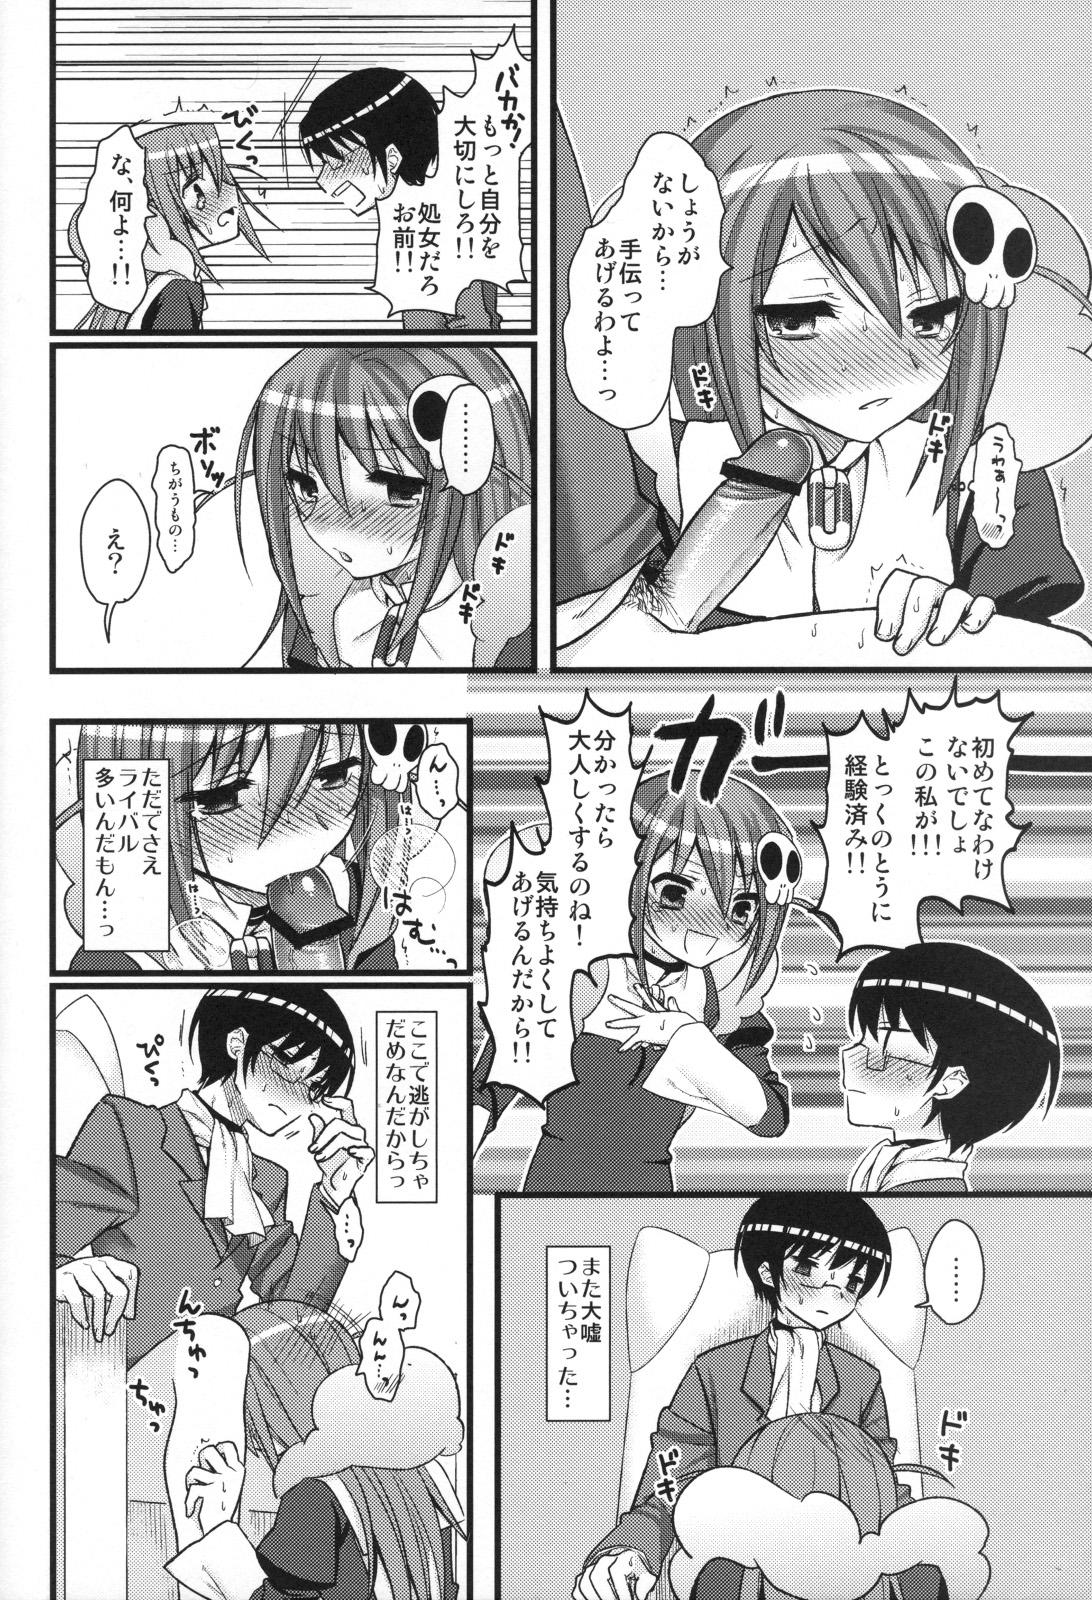 Chacal EXP.04 - The world god only knows Bucetuda - Page 7